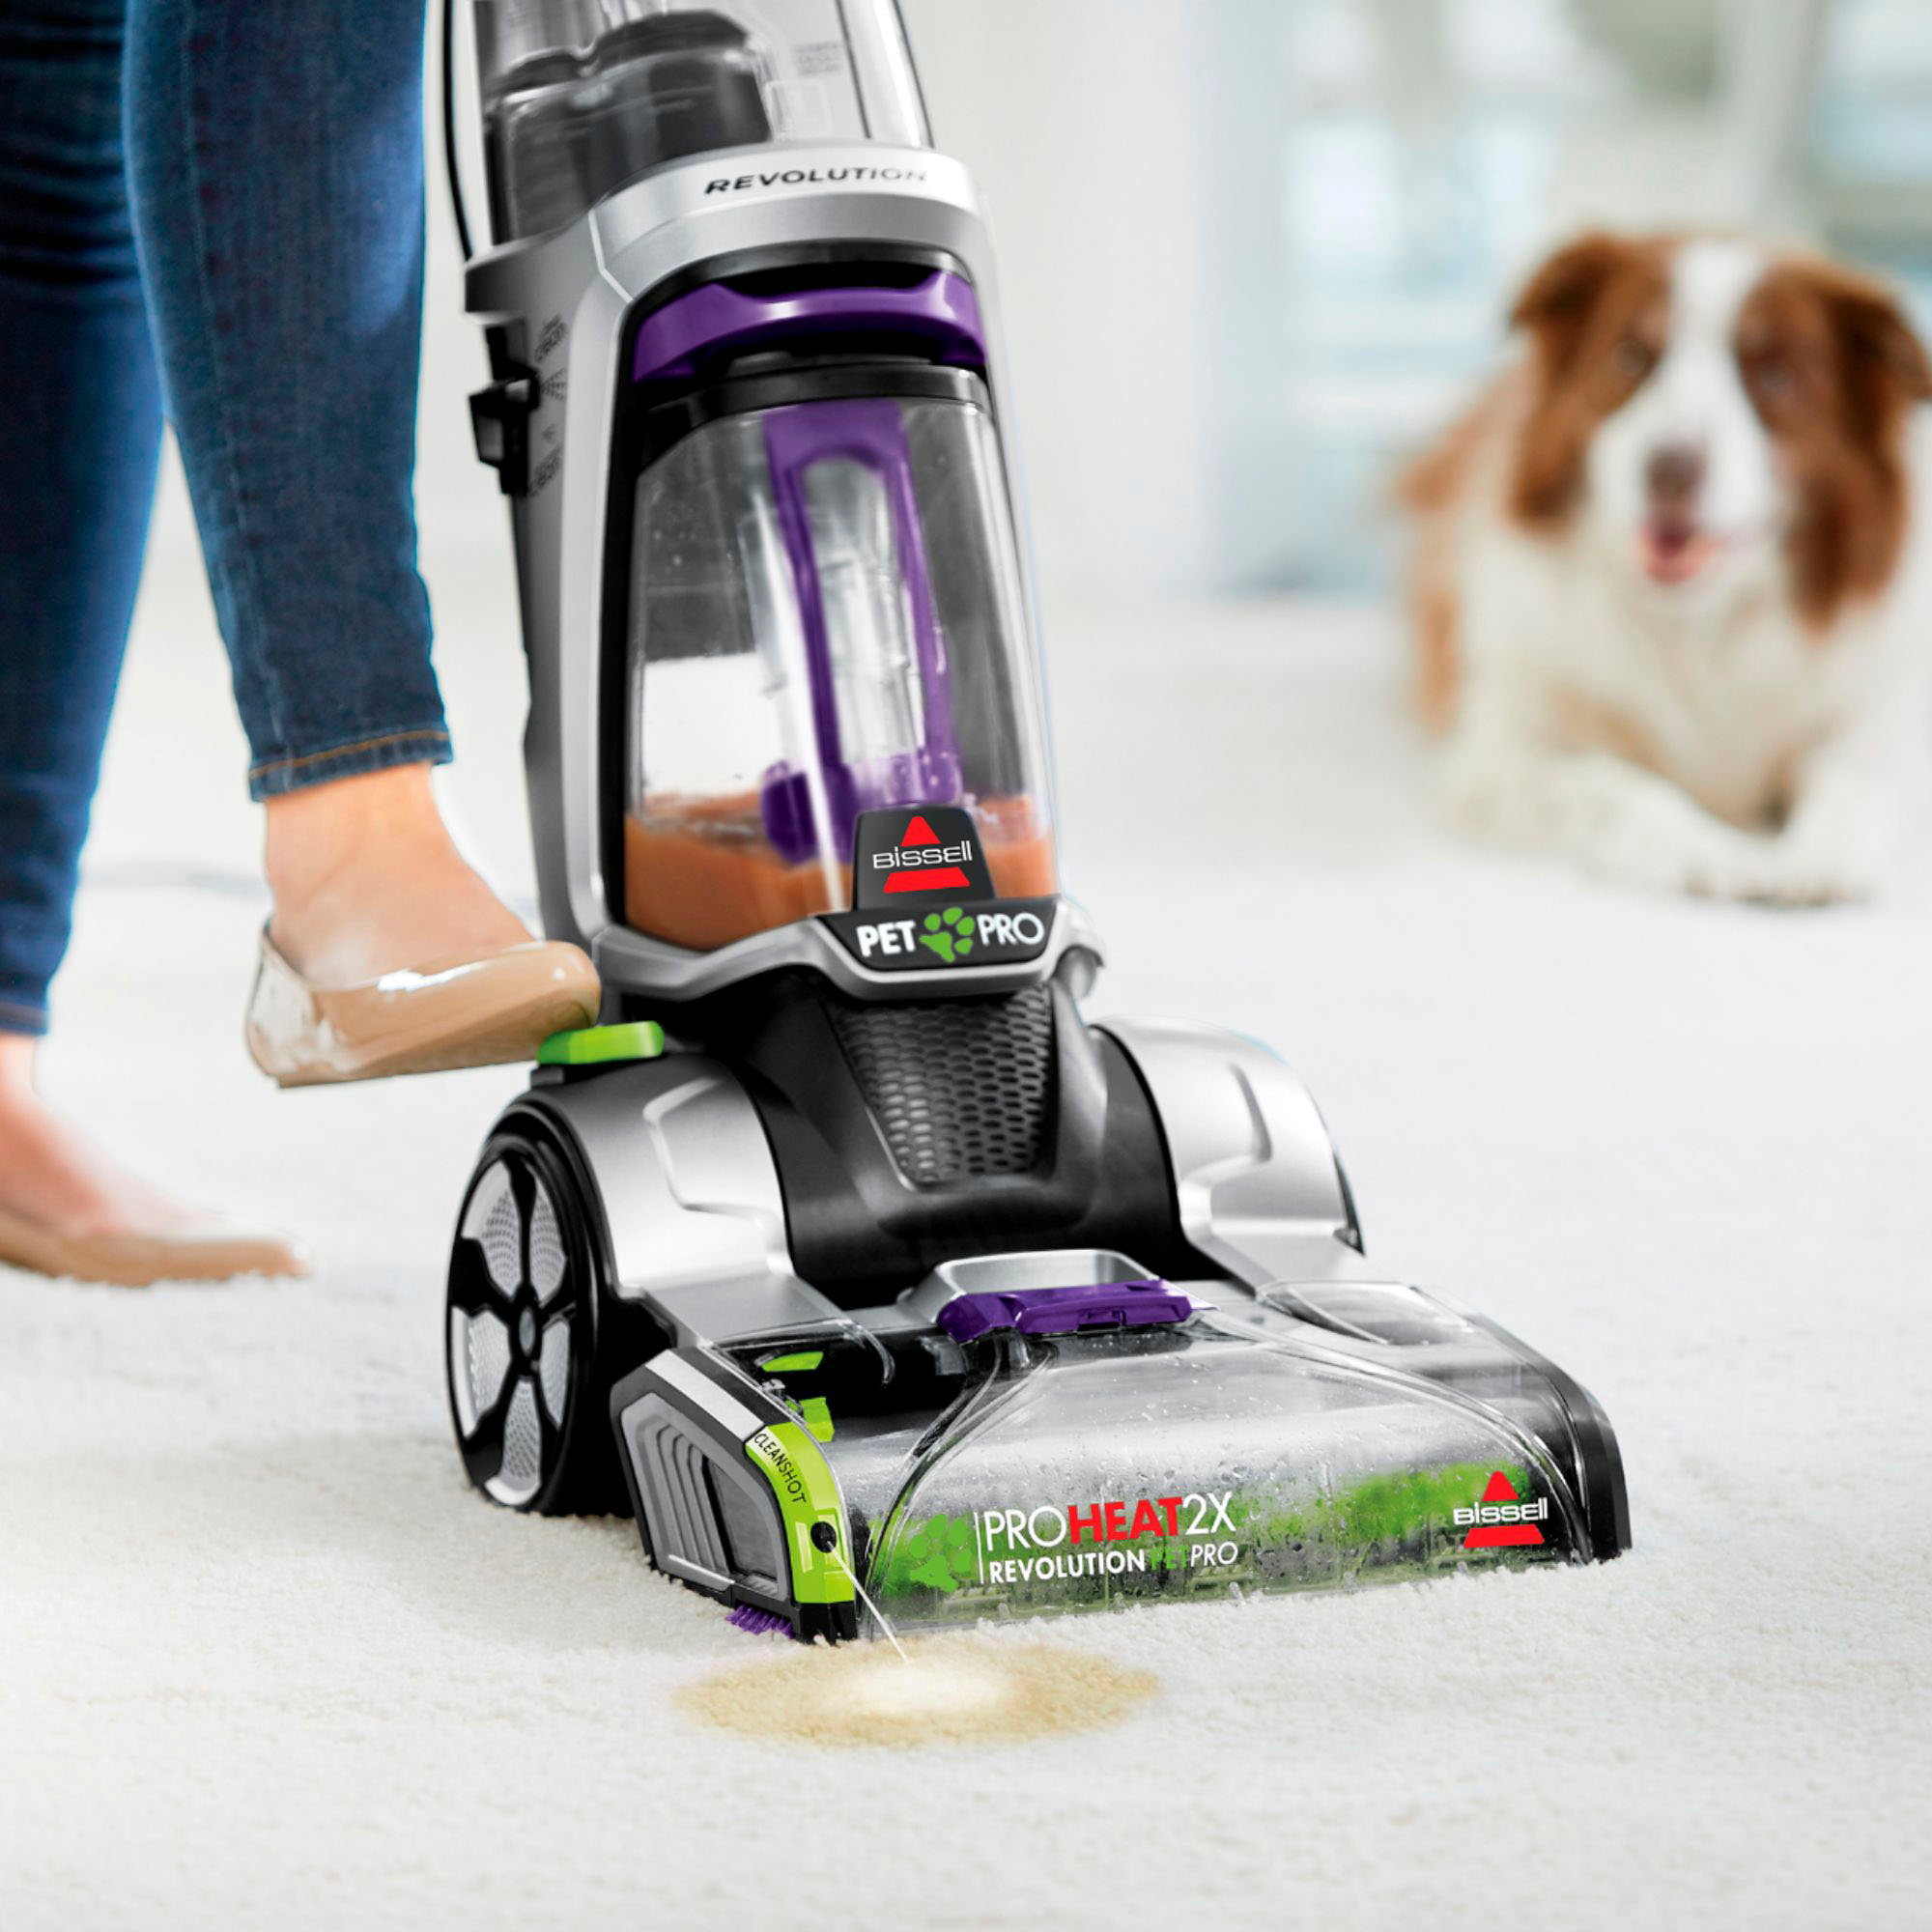 Best carpet cleaner deal: $30 off Bissel's SpotClean ProHeat